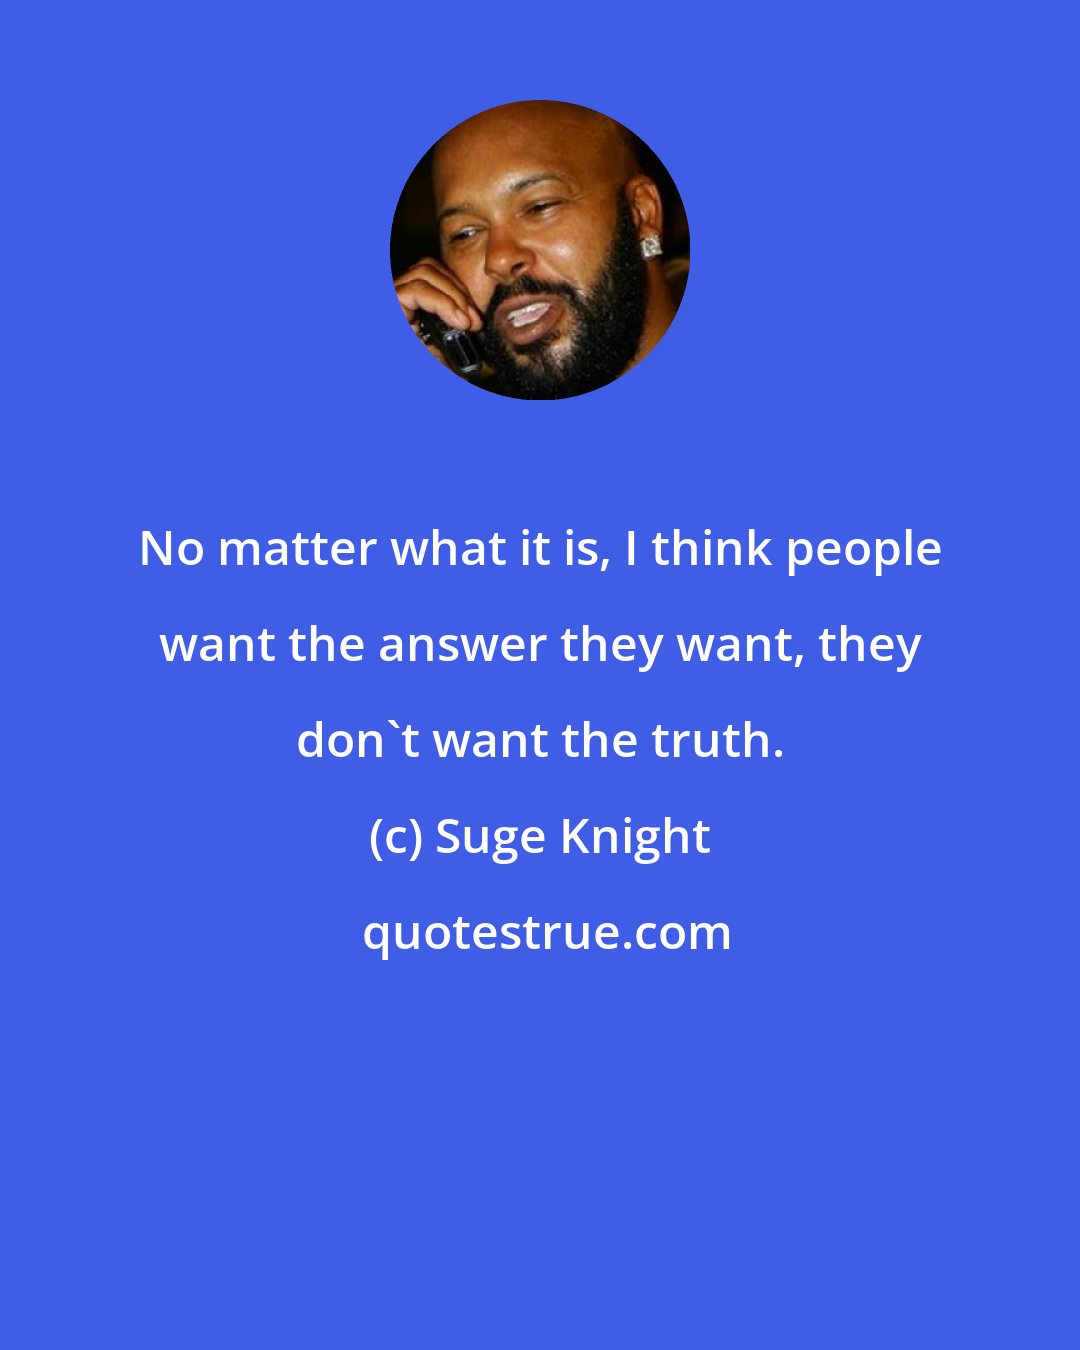 Suge Knight: No matter what it is, I think people want the answer they want, they don't want the truth.